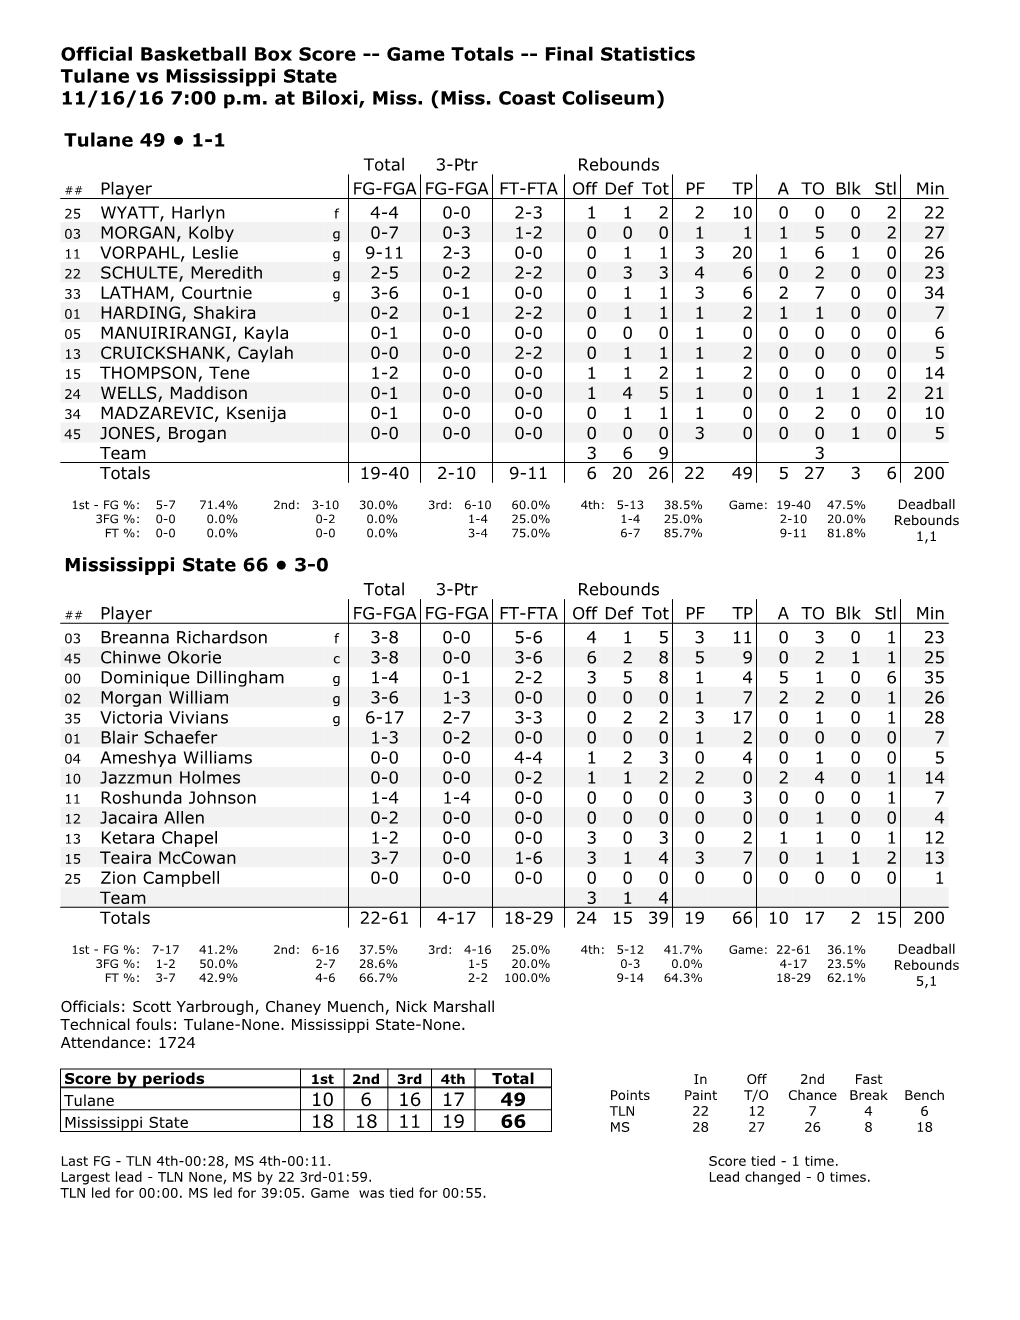 Official Basketball Box Score -- Game Totals -- Final Statistics Tulane Vs Mississippi State 11/16/16 7:00 P.M